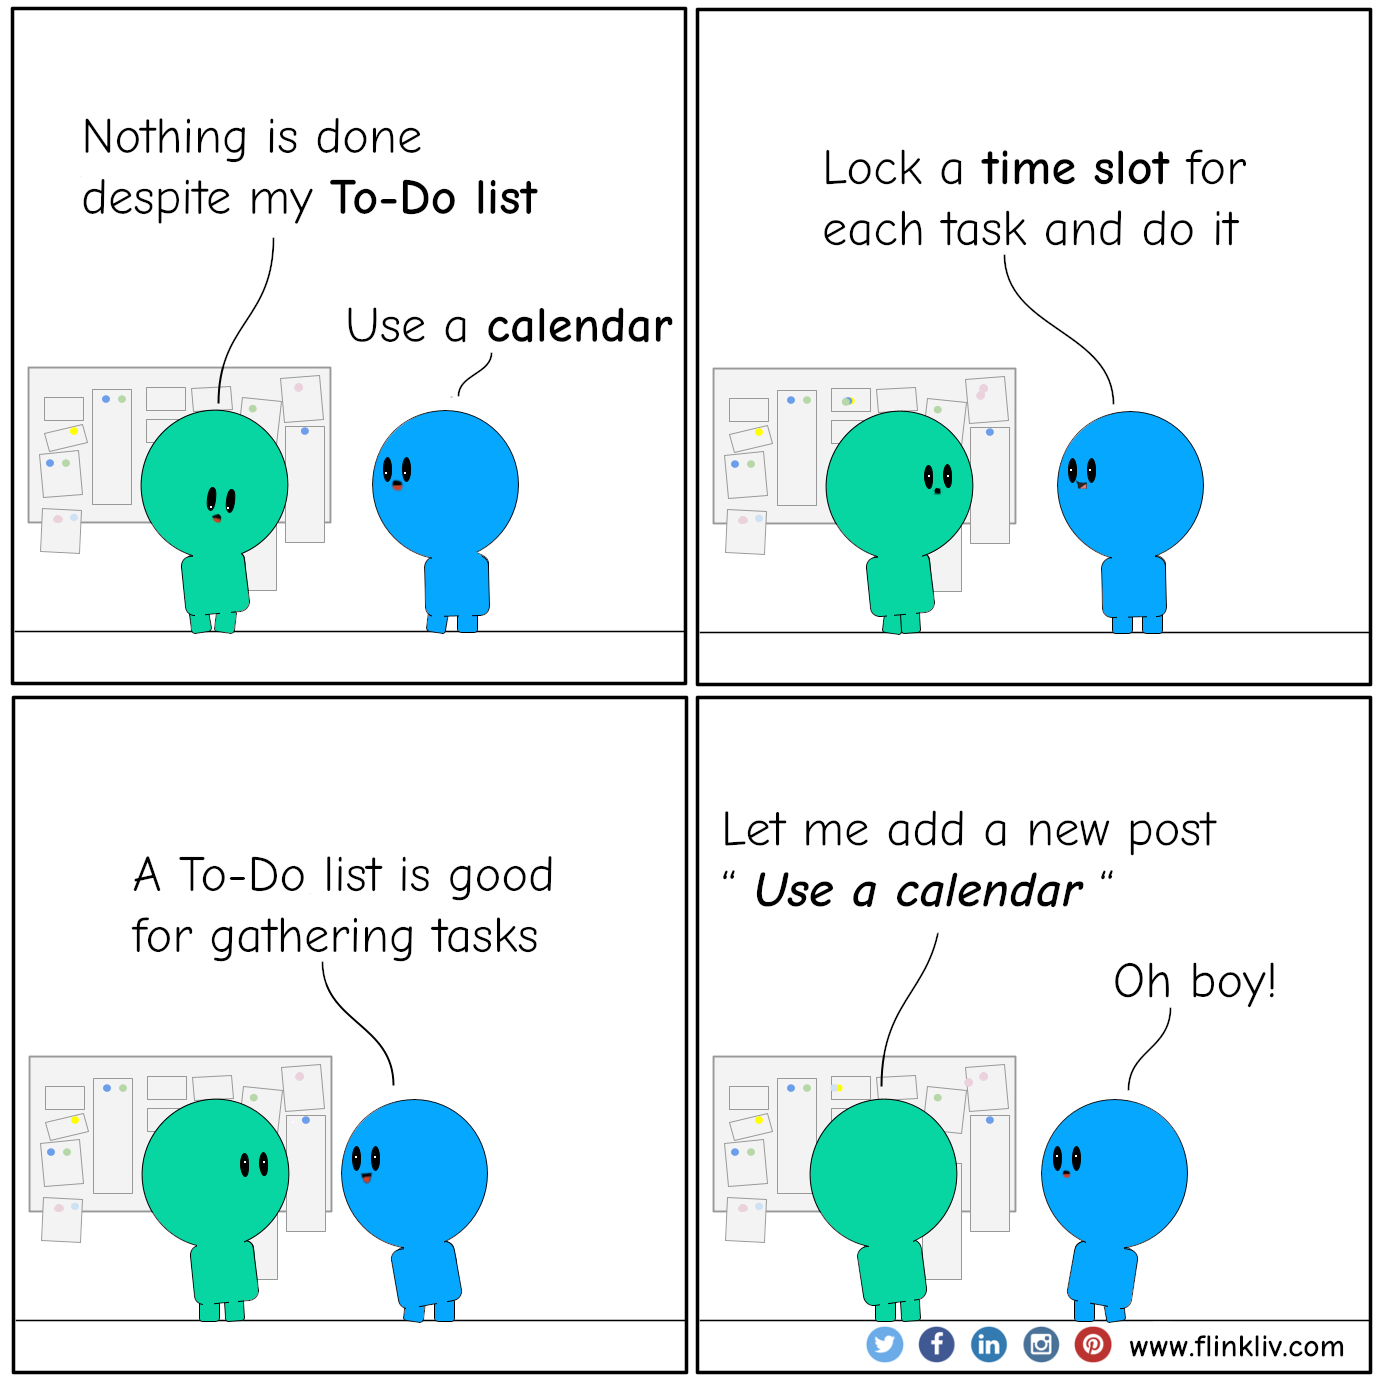 Conversation between A and B about using a calendar instead of To-Do list.
    A: Nothing is done despite my To-Do list 
    B: Use a calendar
    B: Lock a time slot for each task and do it
    B: A To-Do list is good for gathering tasks.
    A: Let me add a new post … Use a calendar
    B: Oh boy!.
    By flinkliv.com